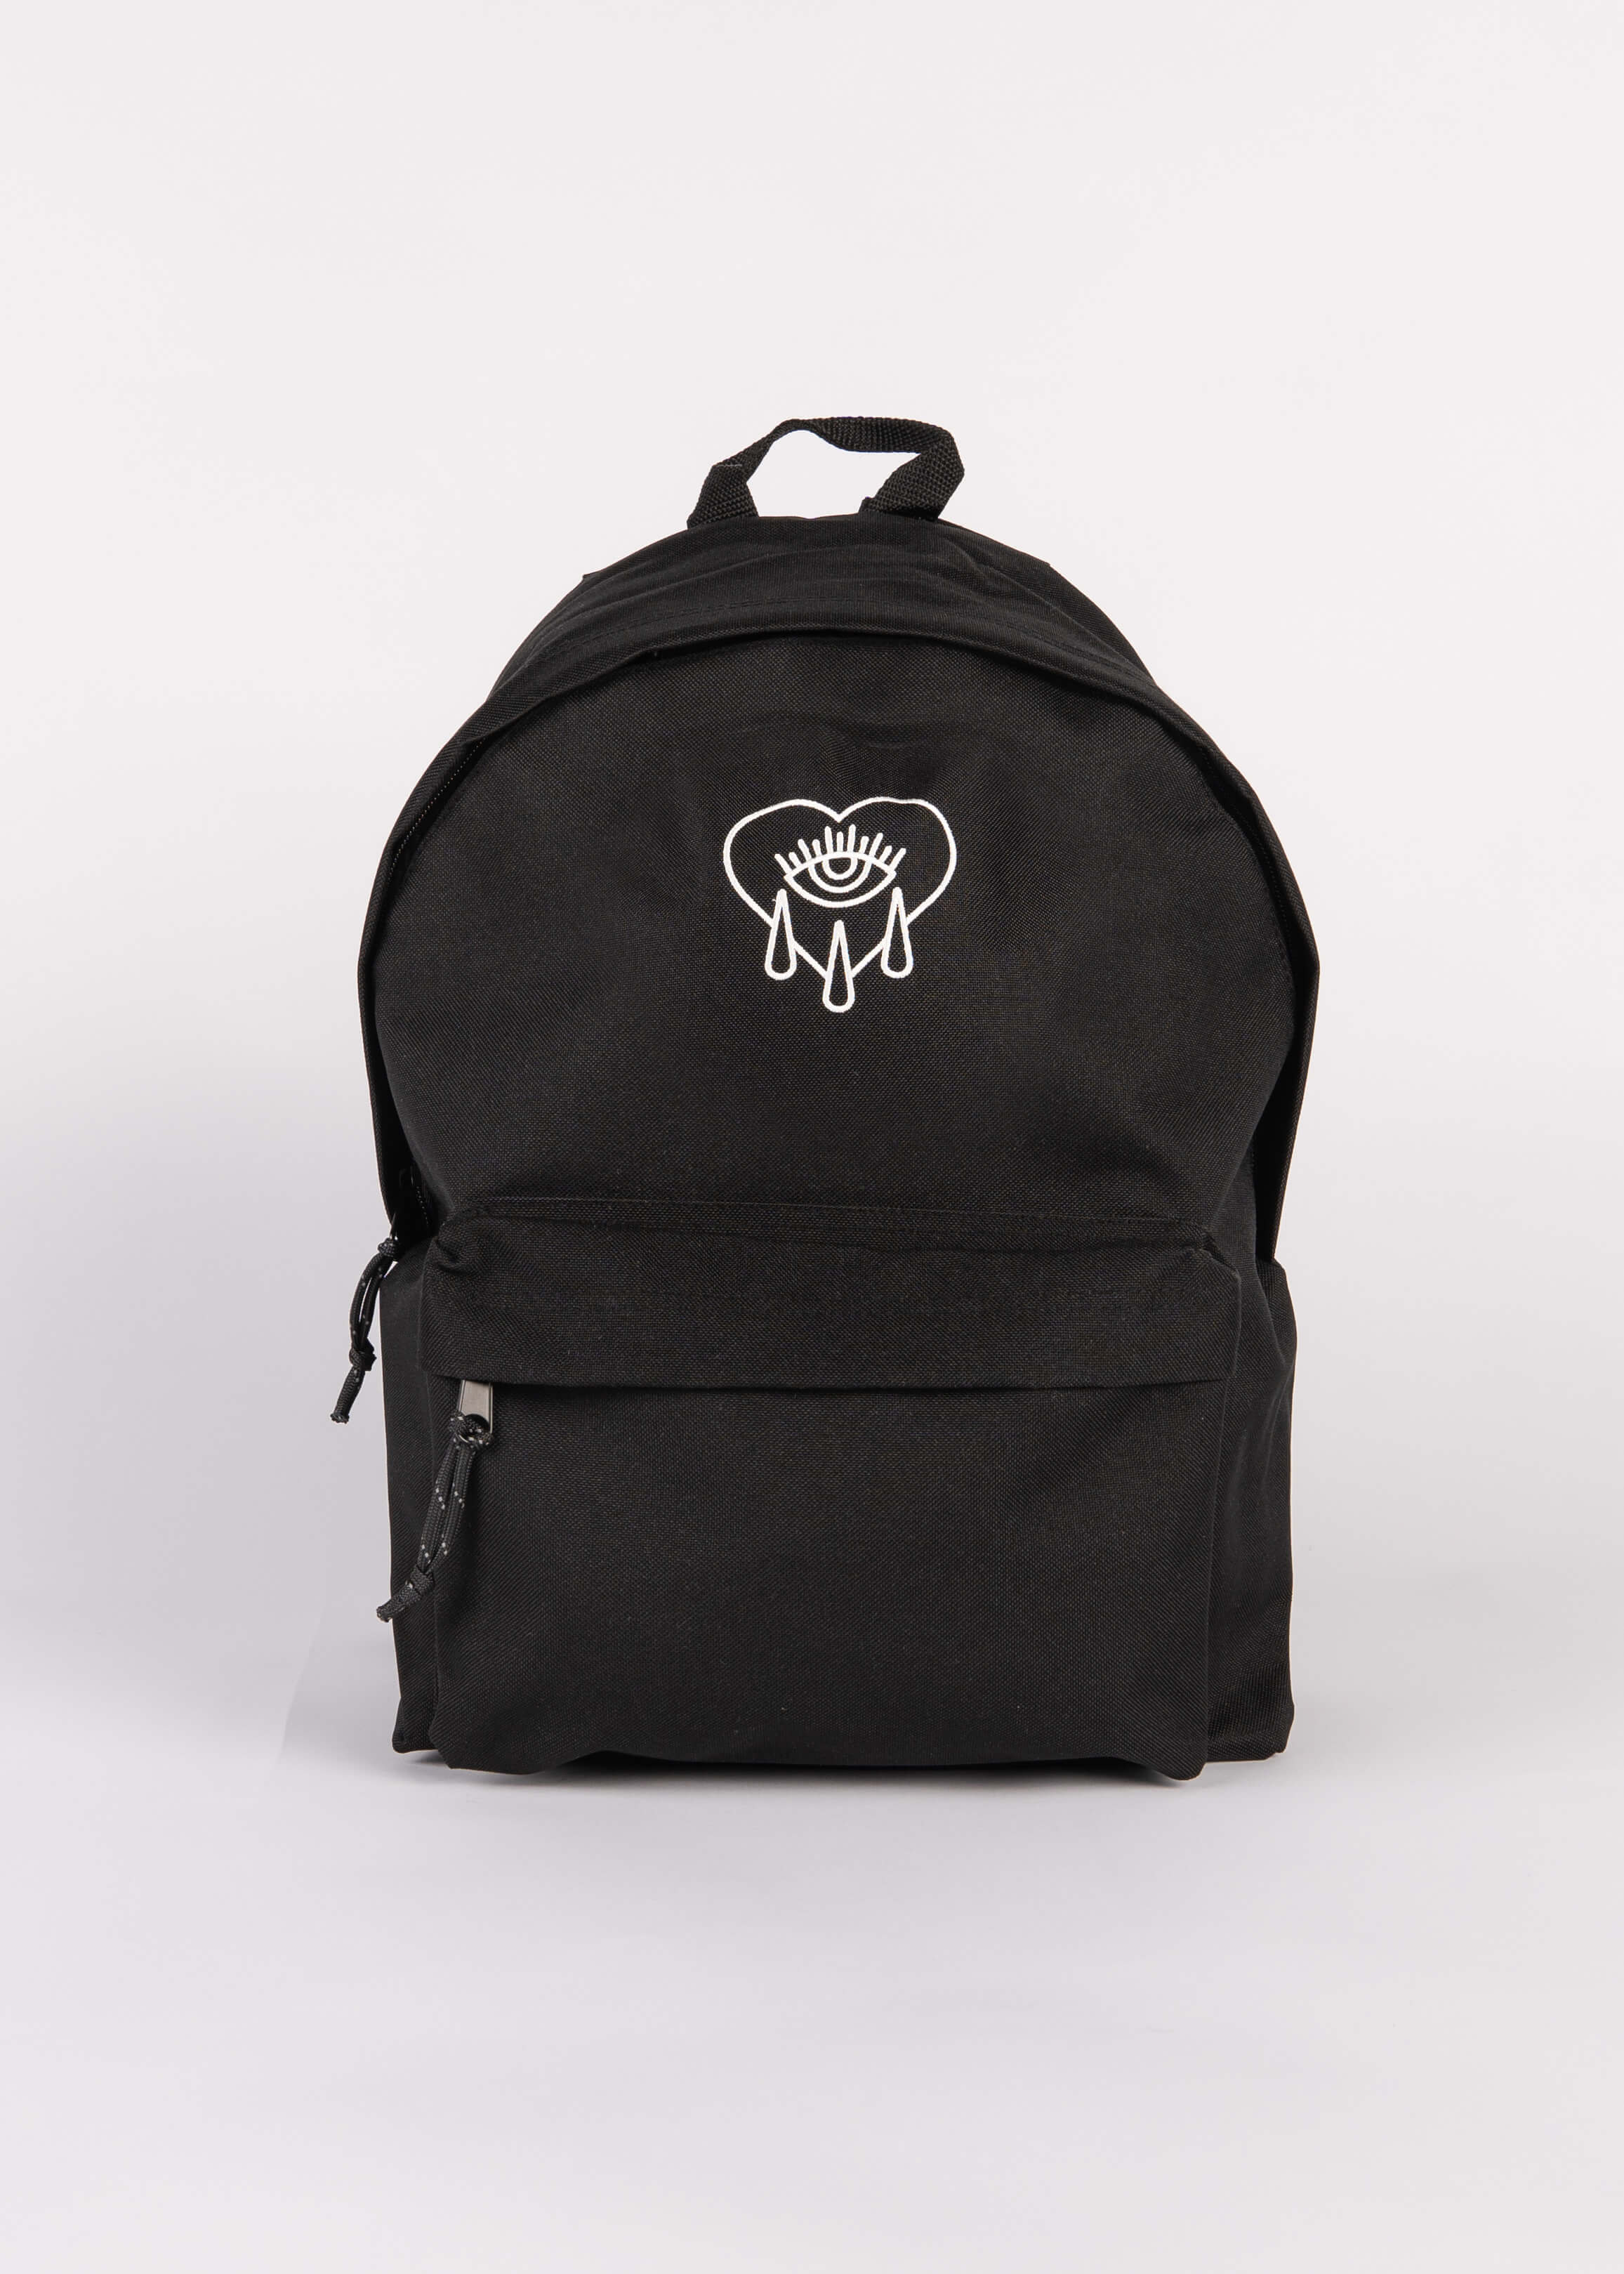 Crying Heart Tattoo Backpack - Black | Bad Monday Apparel